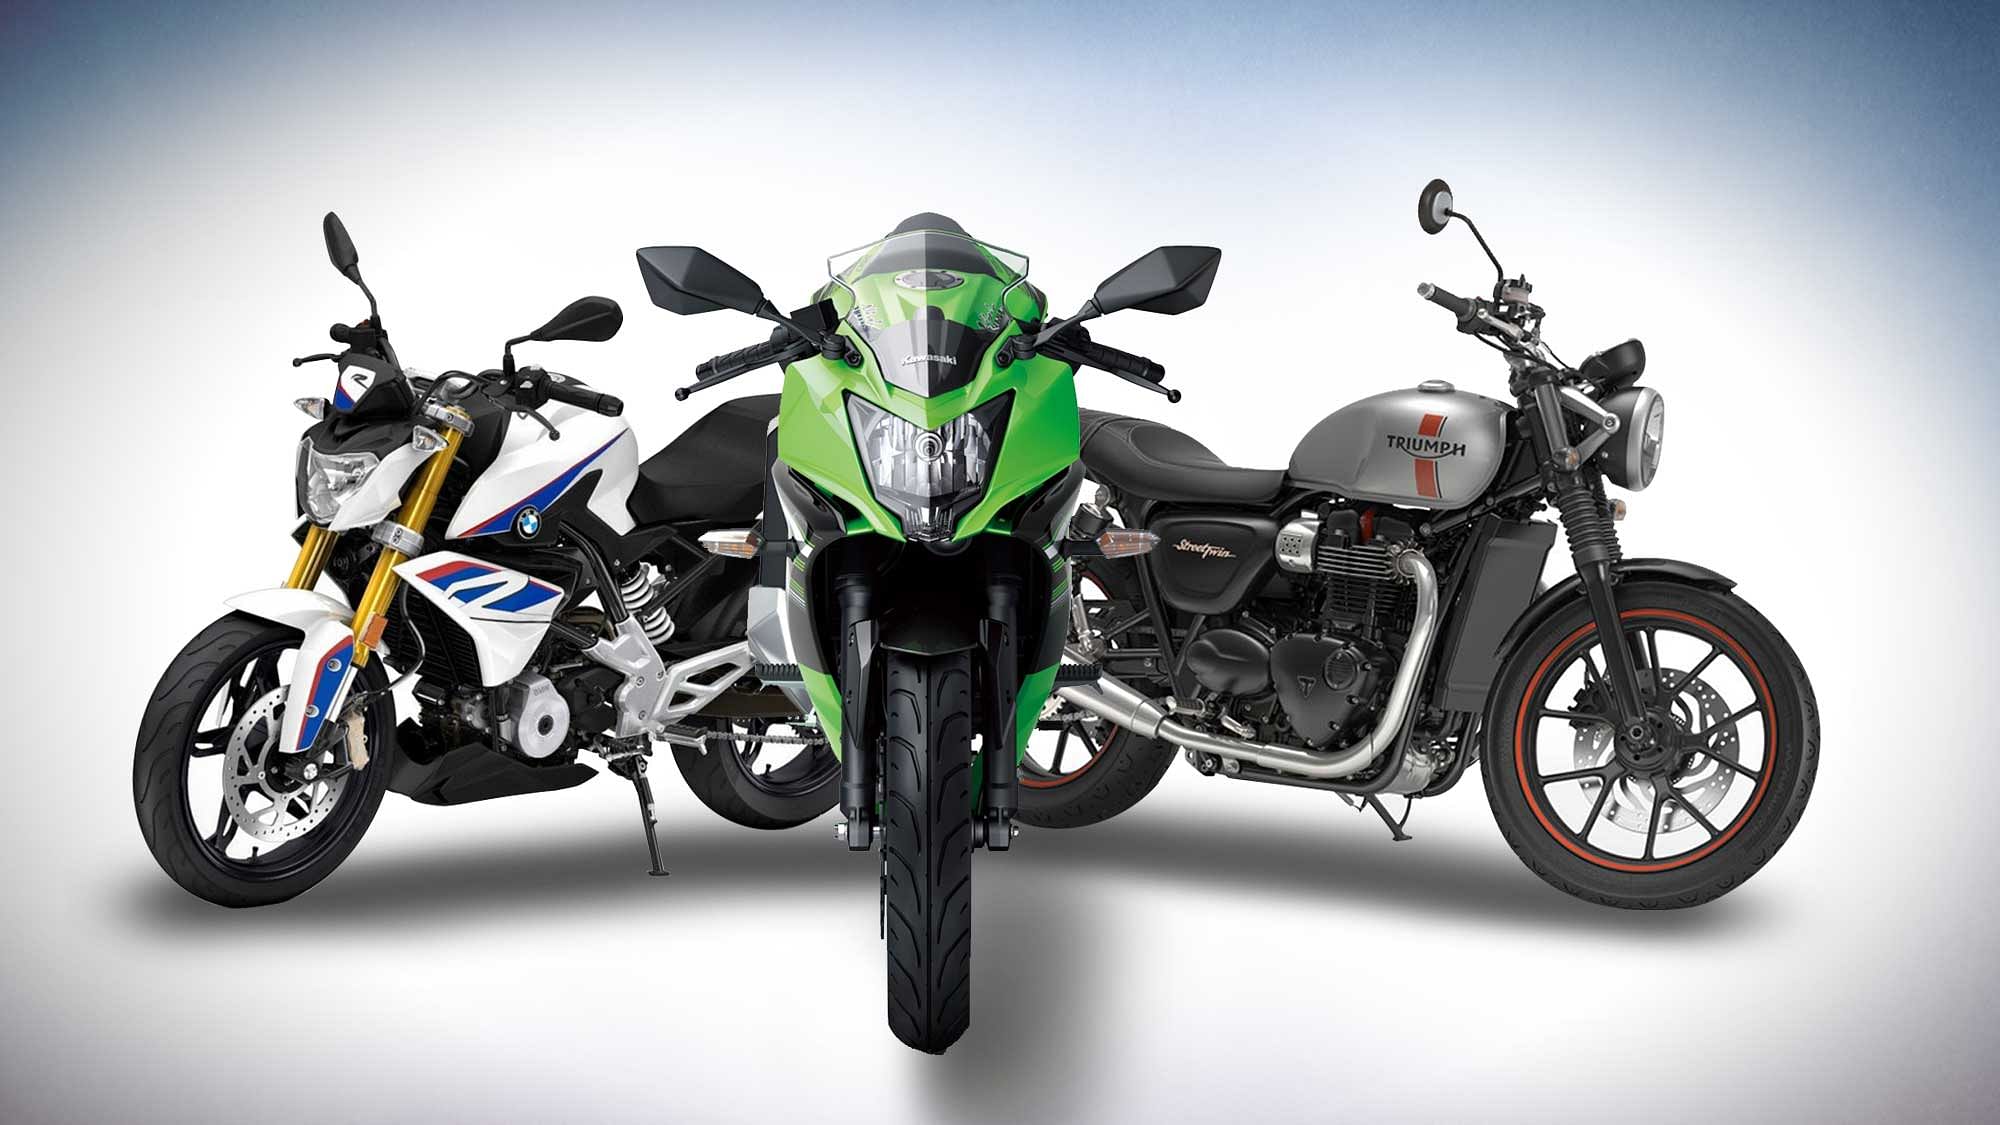 The 2016 Auto Expo will see loads of bikes being displayed, we bring you the best ones. (Photo: <b>The Quint</b>)